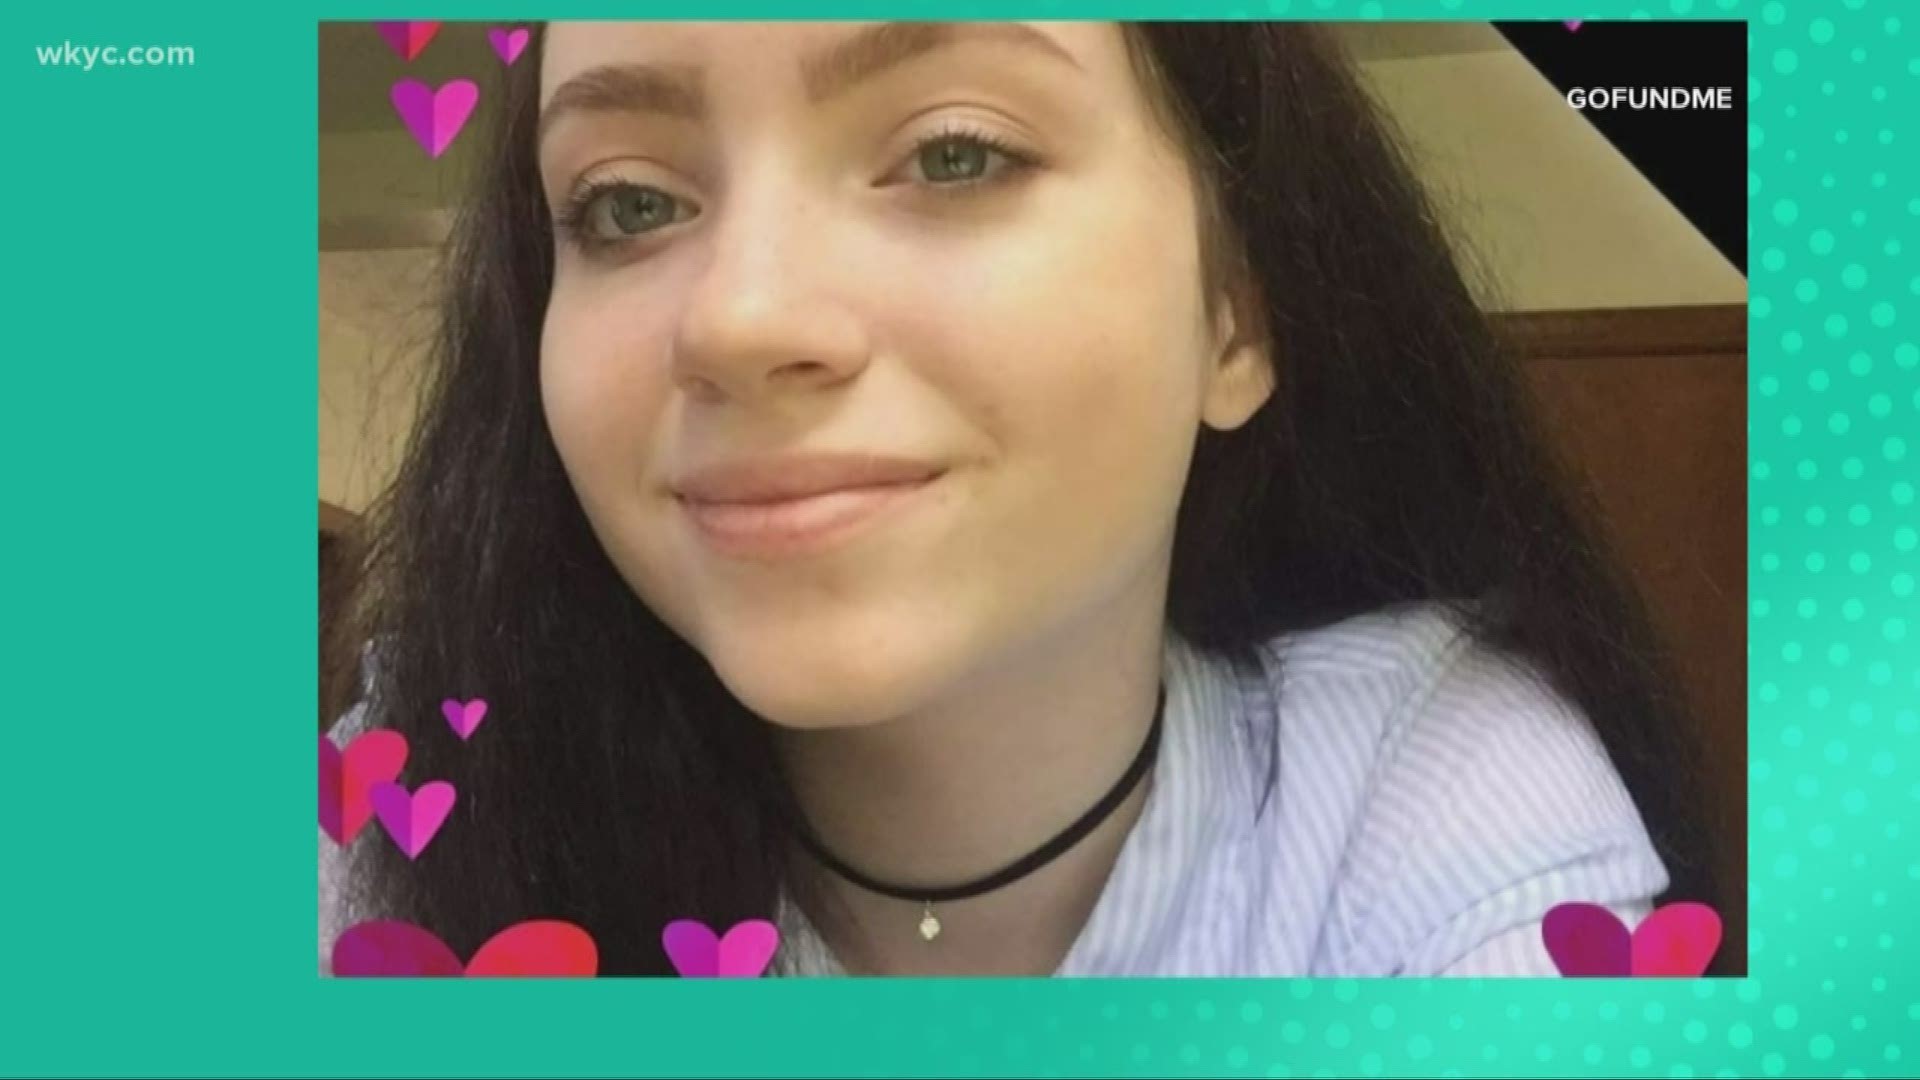 Jan. 2, 2020: Sad news out of Berea as the school district reports the death of a student this week. 16-year-old Kaylee Roberts passed away unexpectedly.